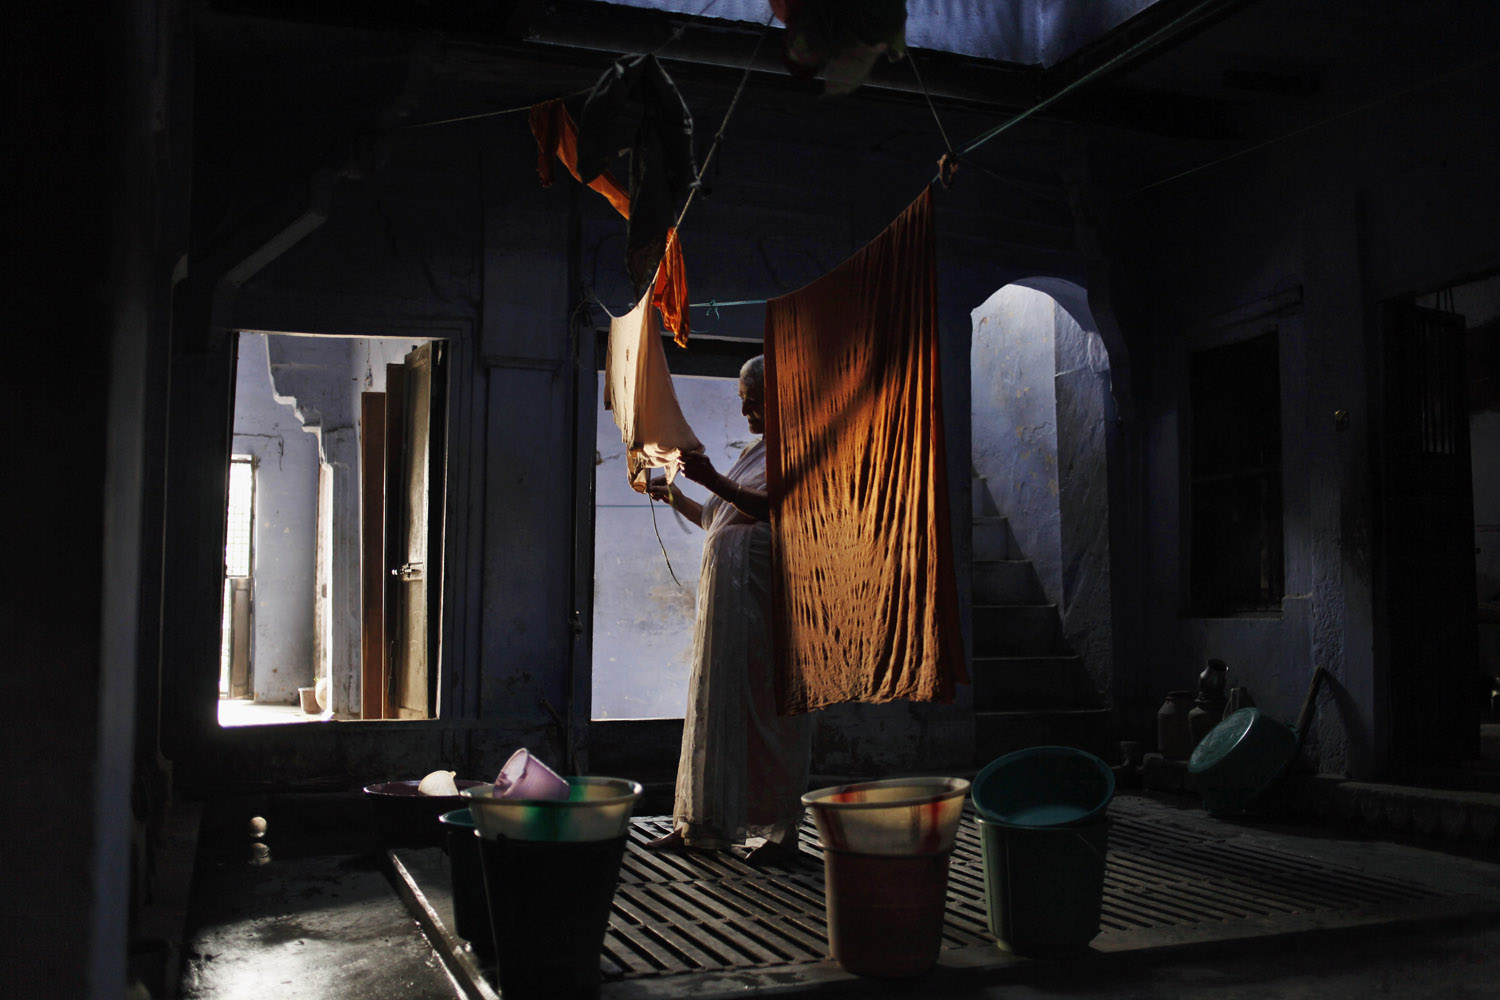 May 27, 2013. An elderly Indian widow hangs clothes to dry inside her small living quarter at an Ashram in Varanasi, India.